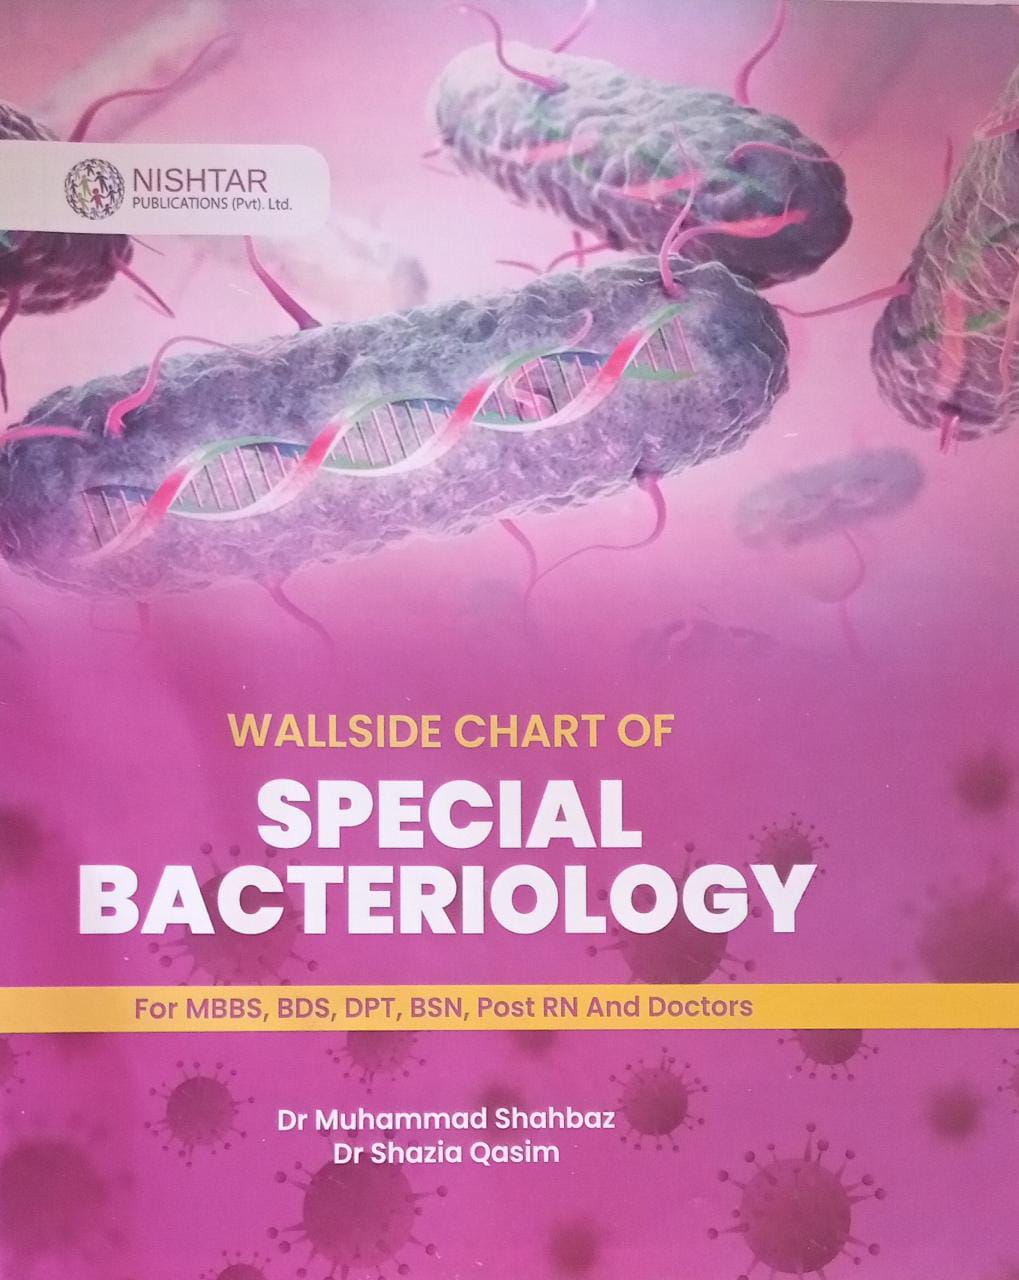 wallside chart of special bacteriology for mbbs, bds, dpt, bsn, post rn and doctors